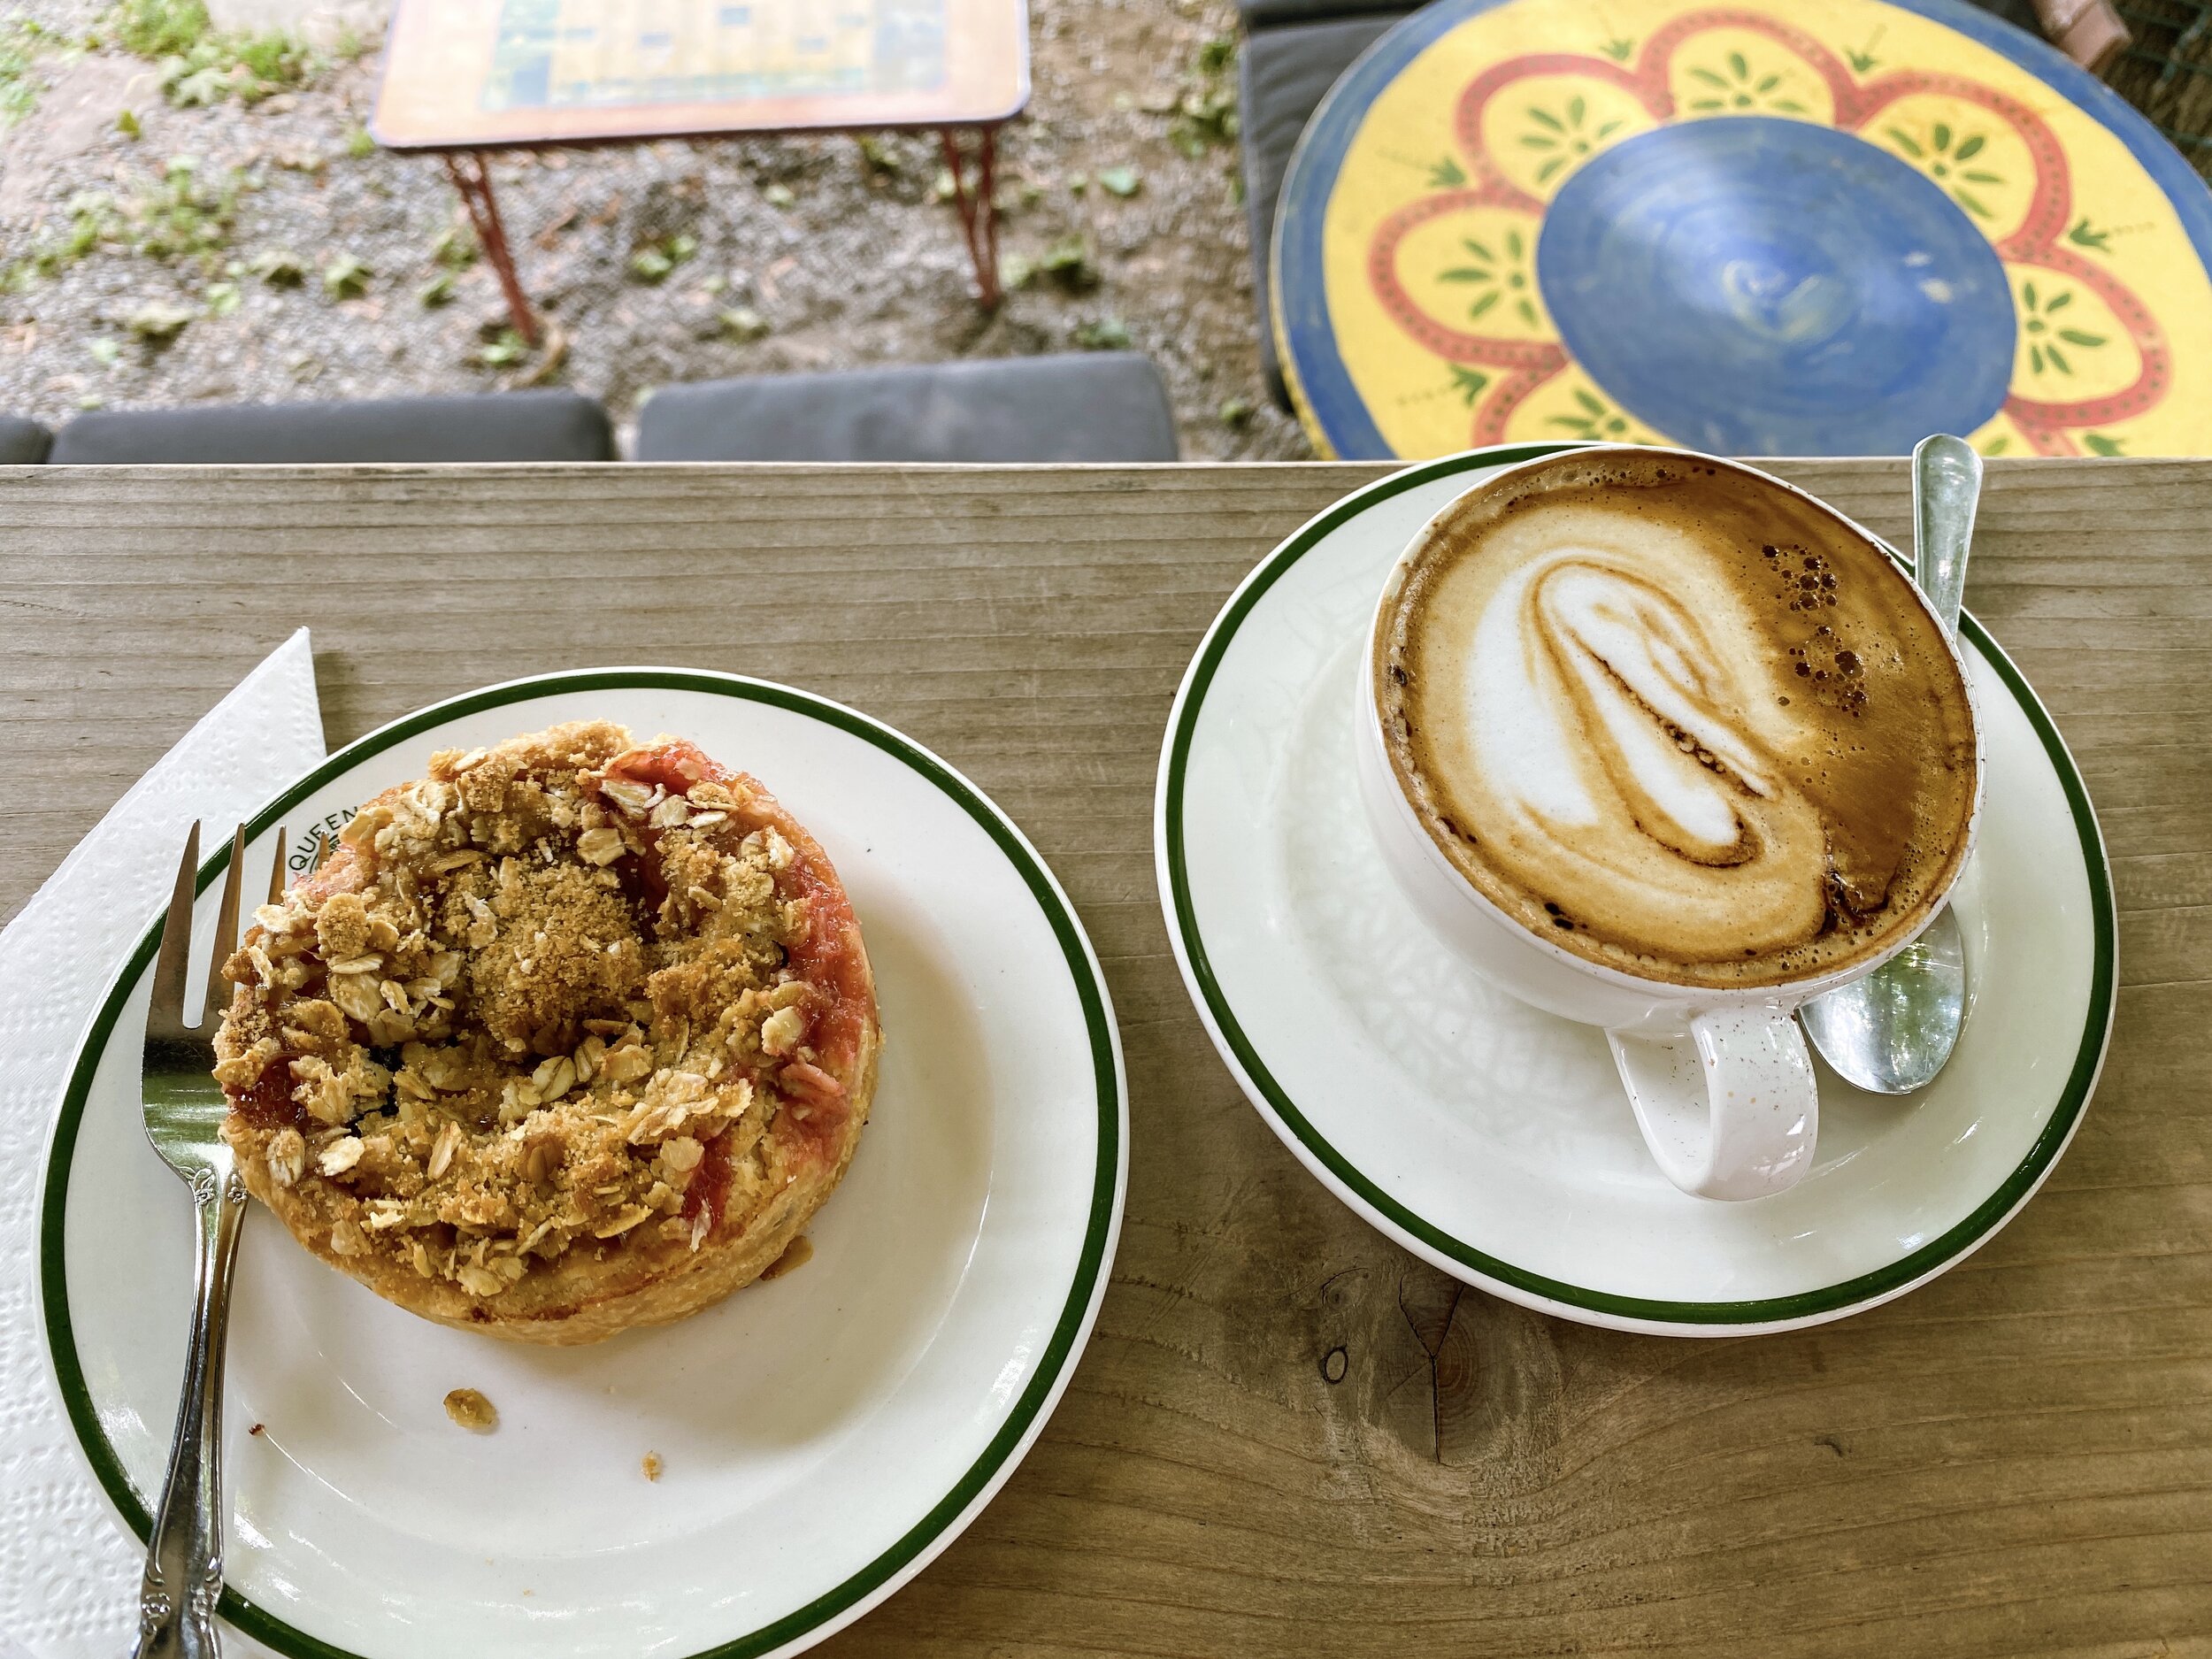 Where to eat in niagara-on-the-lake_the pie plate.jpg